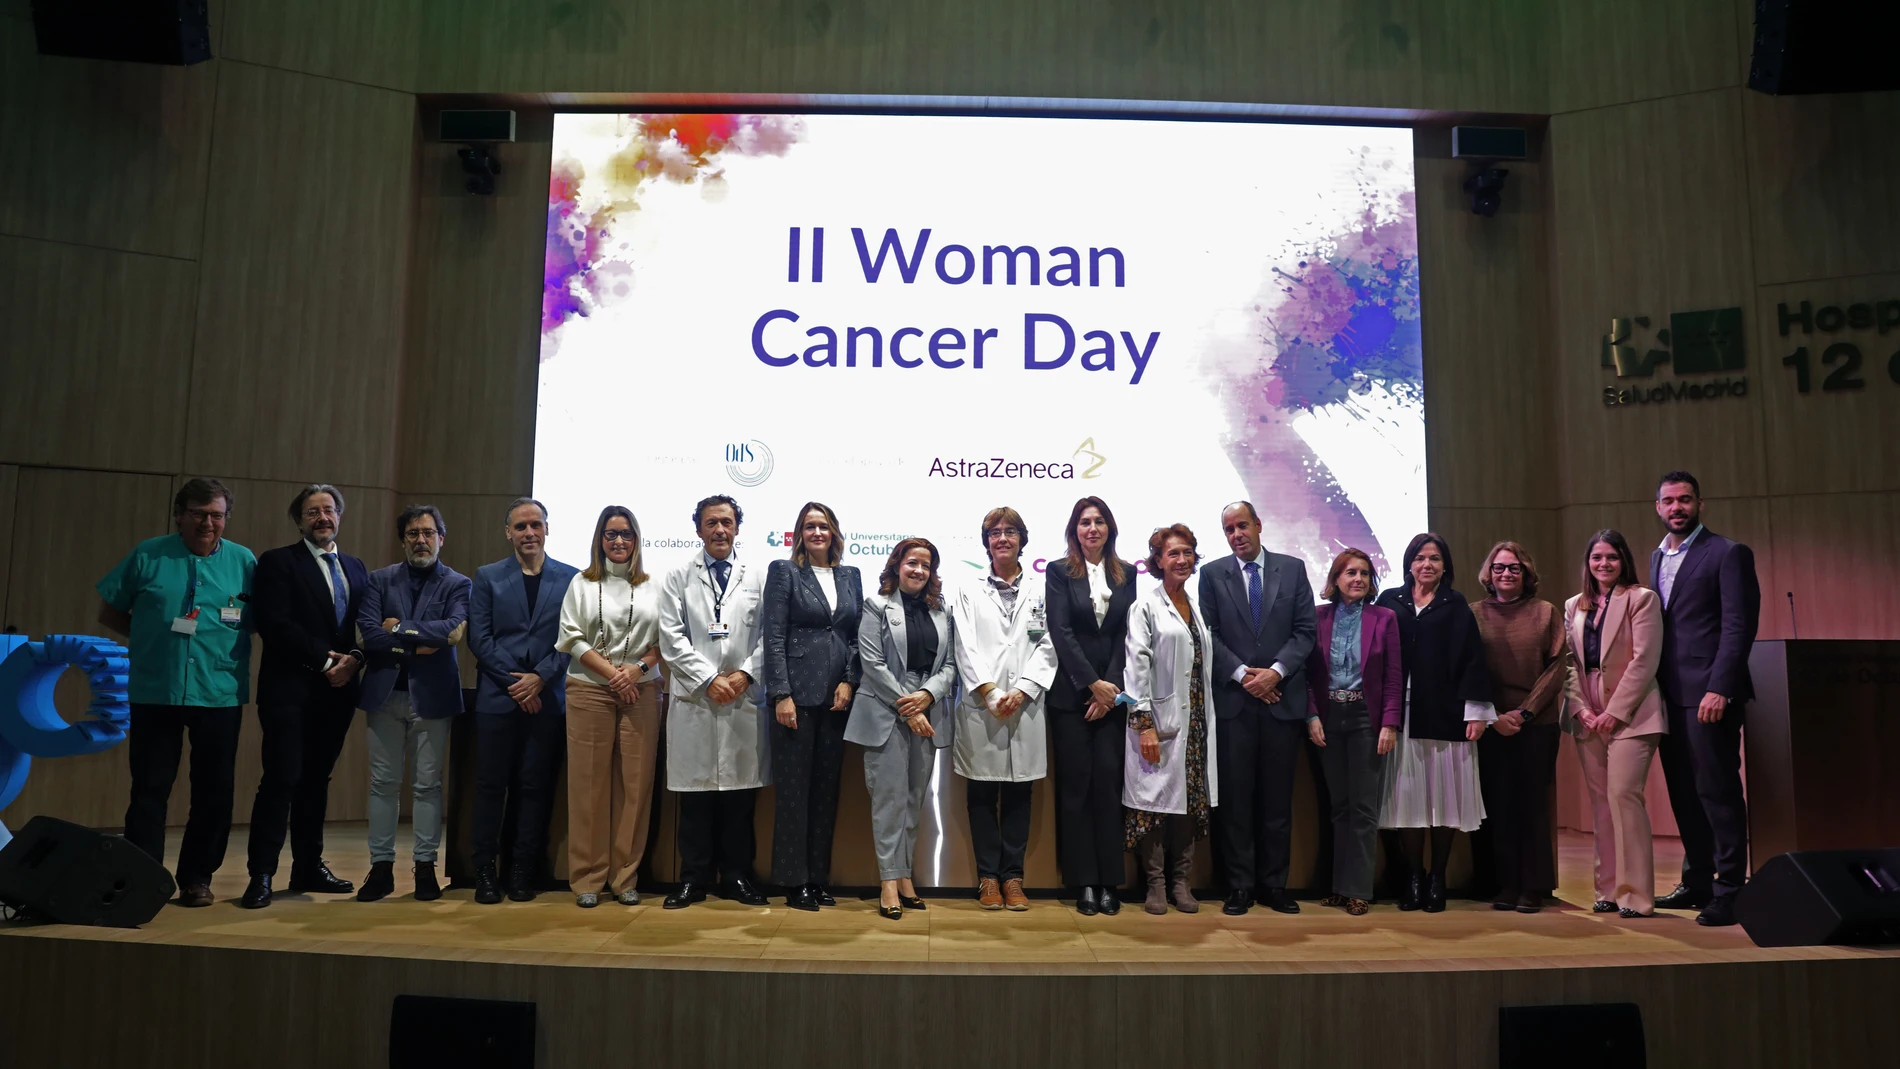 Encuentro II Woman Cancer Day